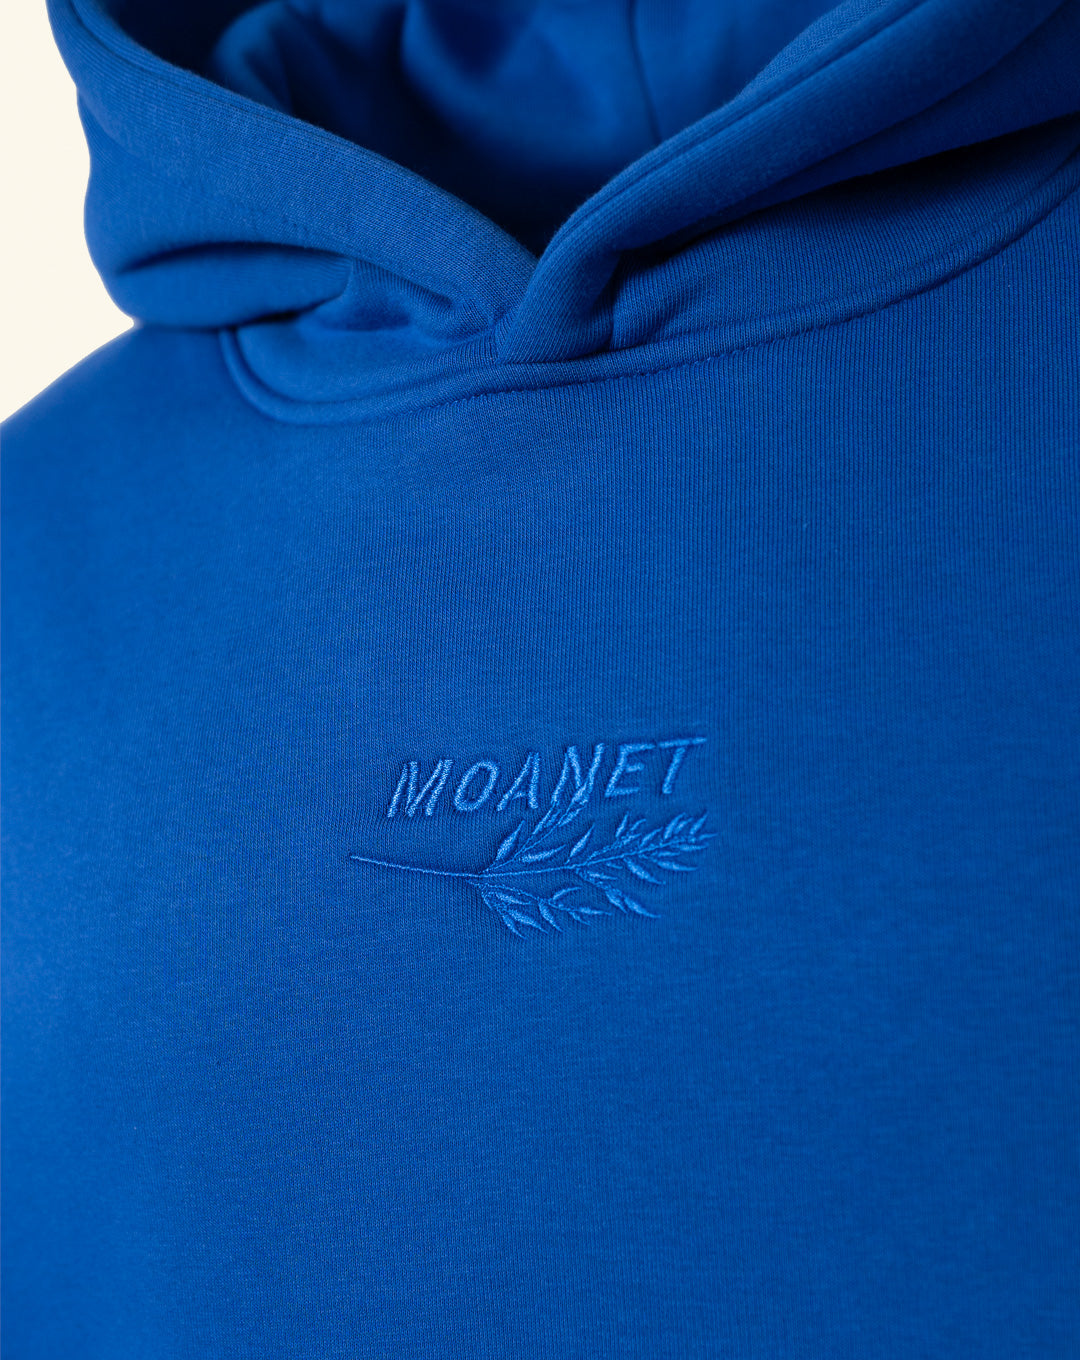 MOANET Blank Classic Hoodie royal